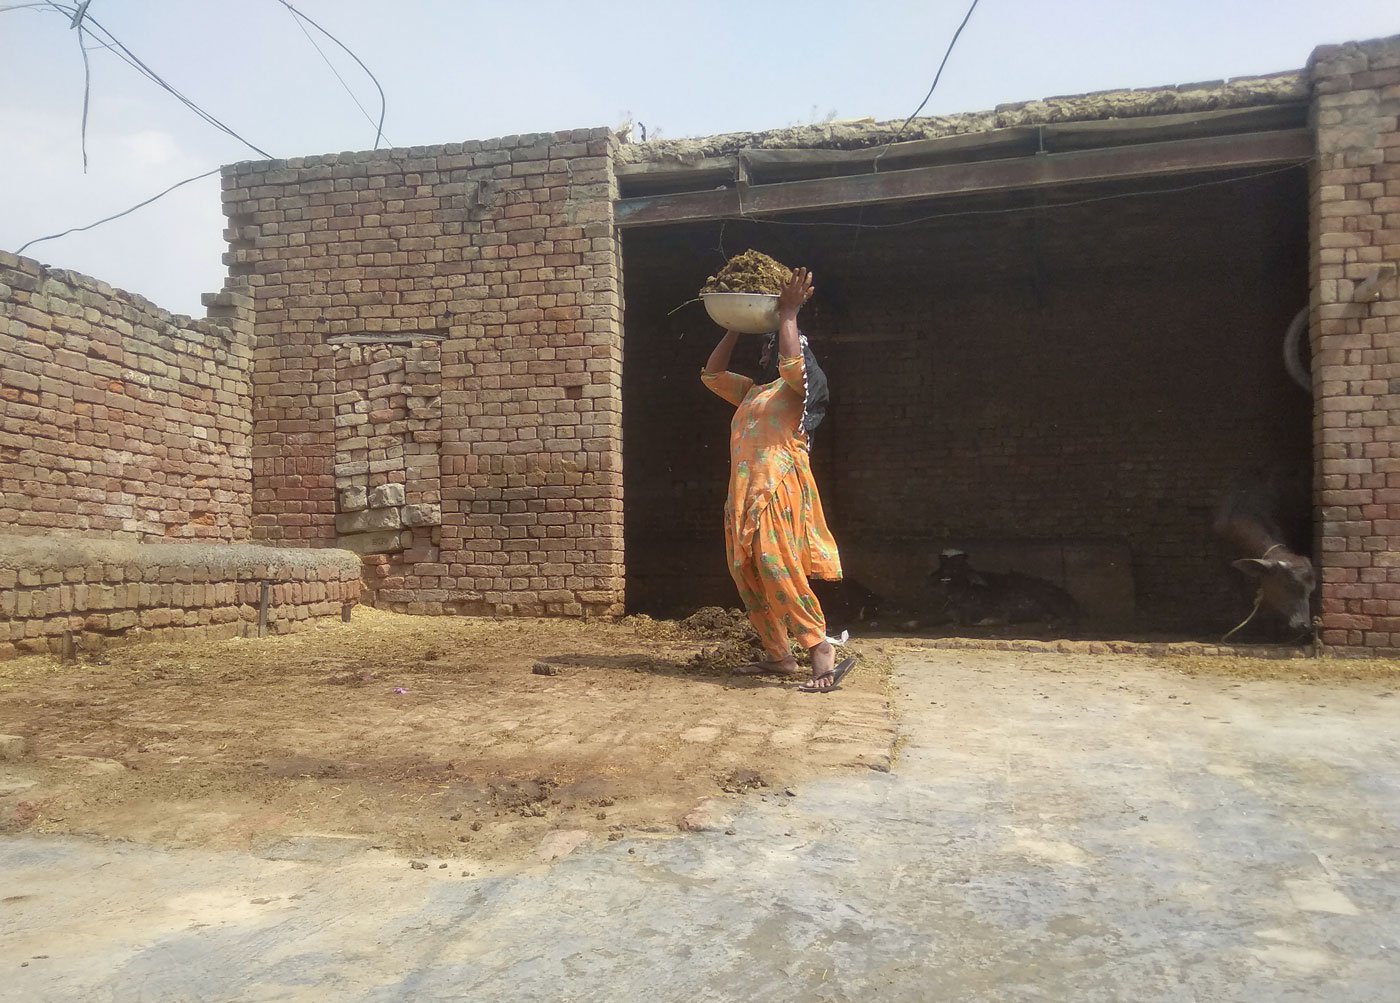 After filling the baalta (tub), Manjit hoists it on her head and carries it out of the property